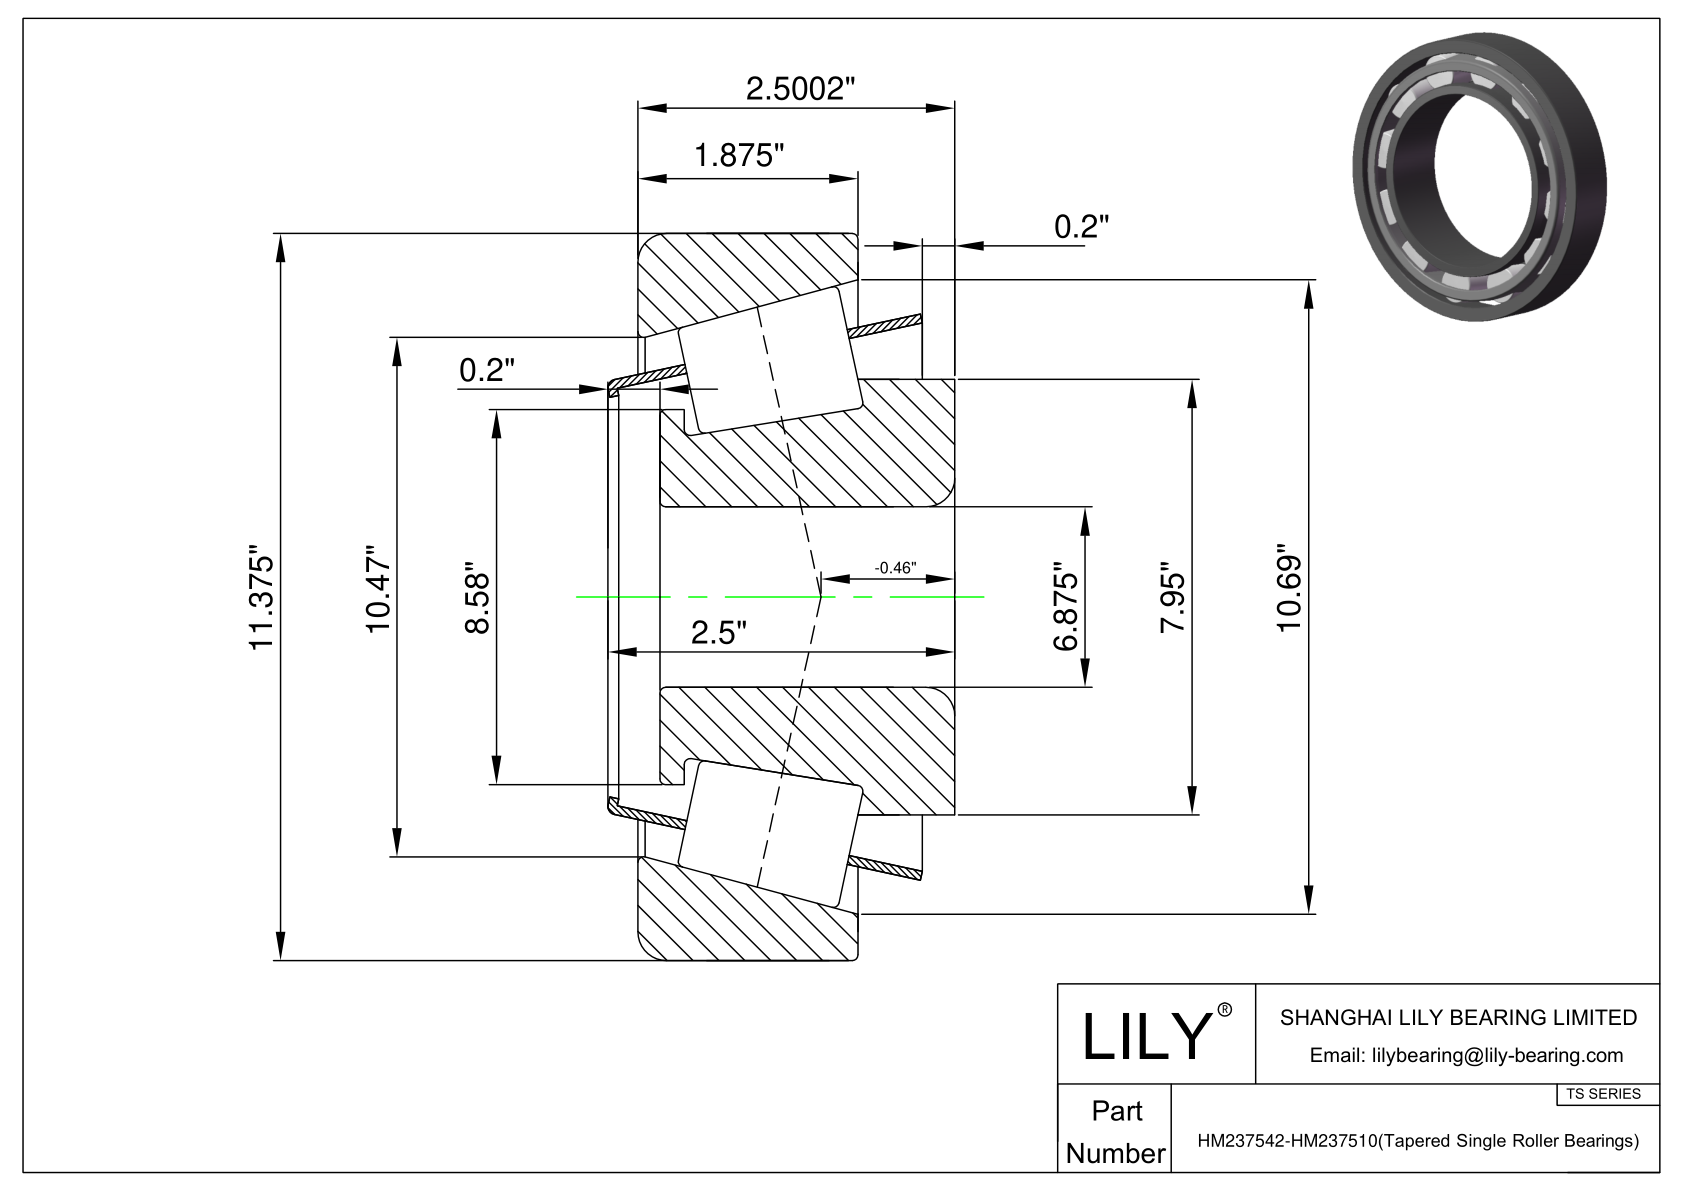 HM237542-HM237510 TS (Tapered Single Roller Bearings) (Imperial) cad drawing